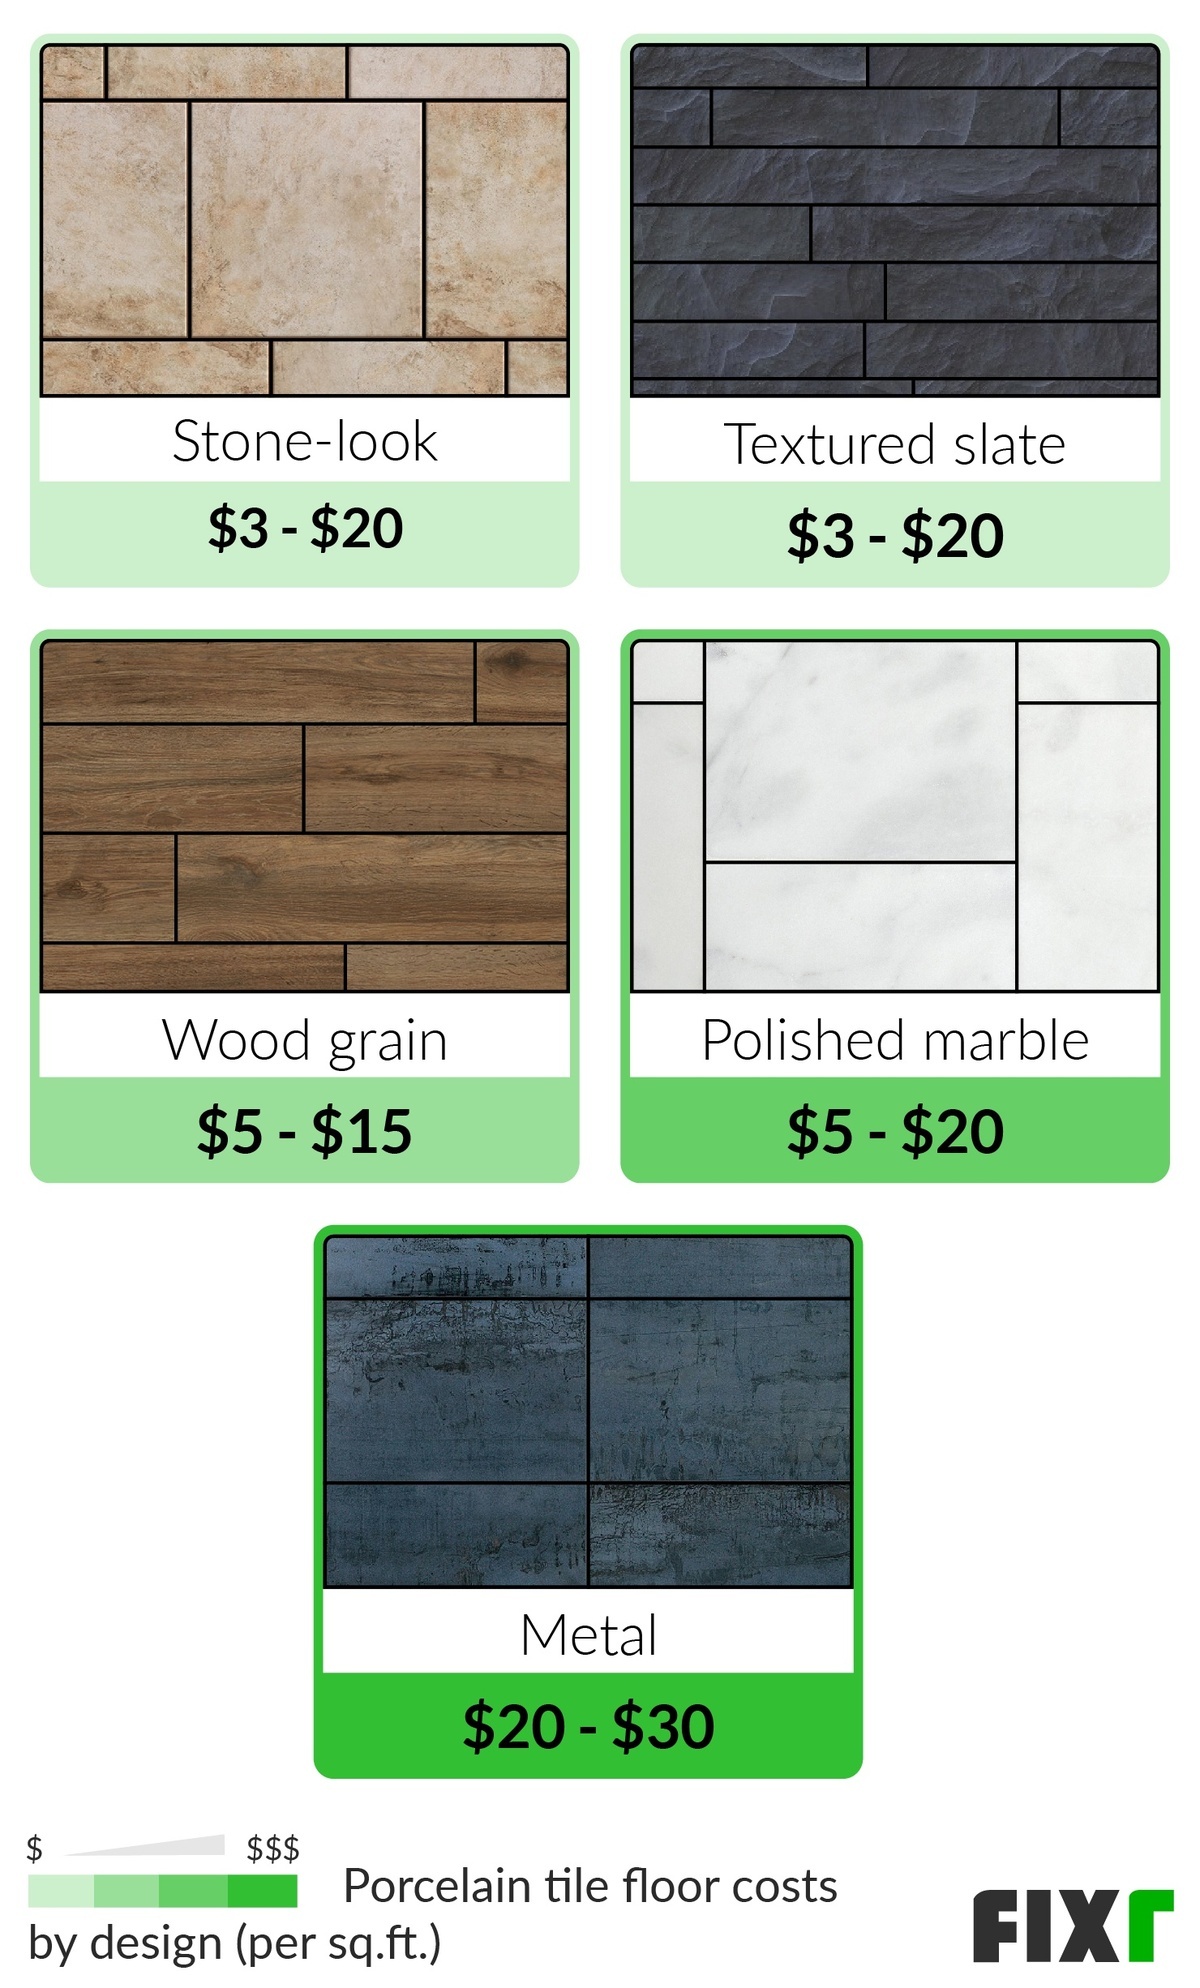 Cost Of Porcelain Tile Flooring, How Much Does It Cost To Install Porcelain Tile Per Square Foot